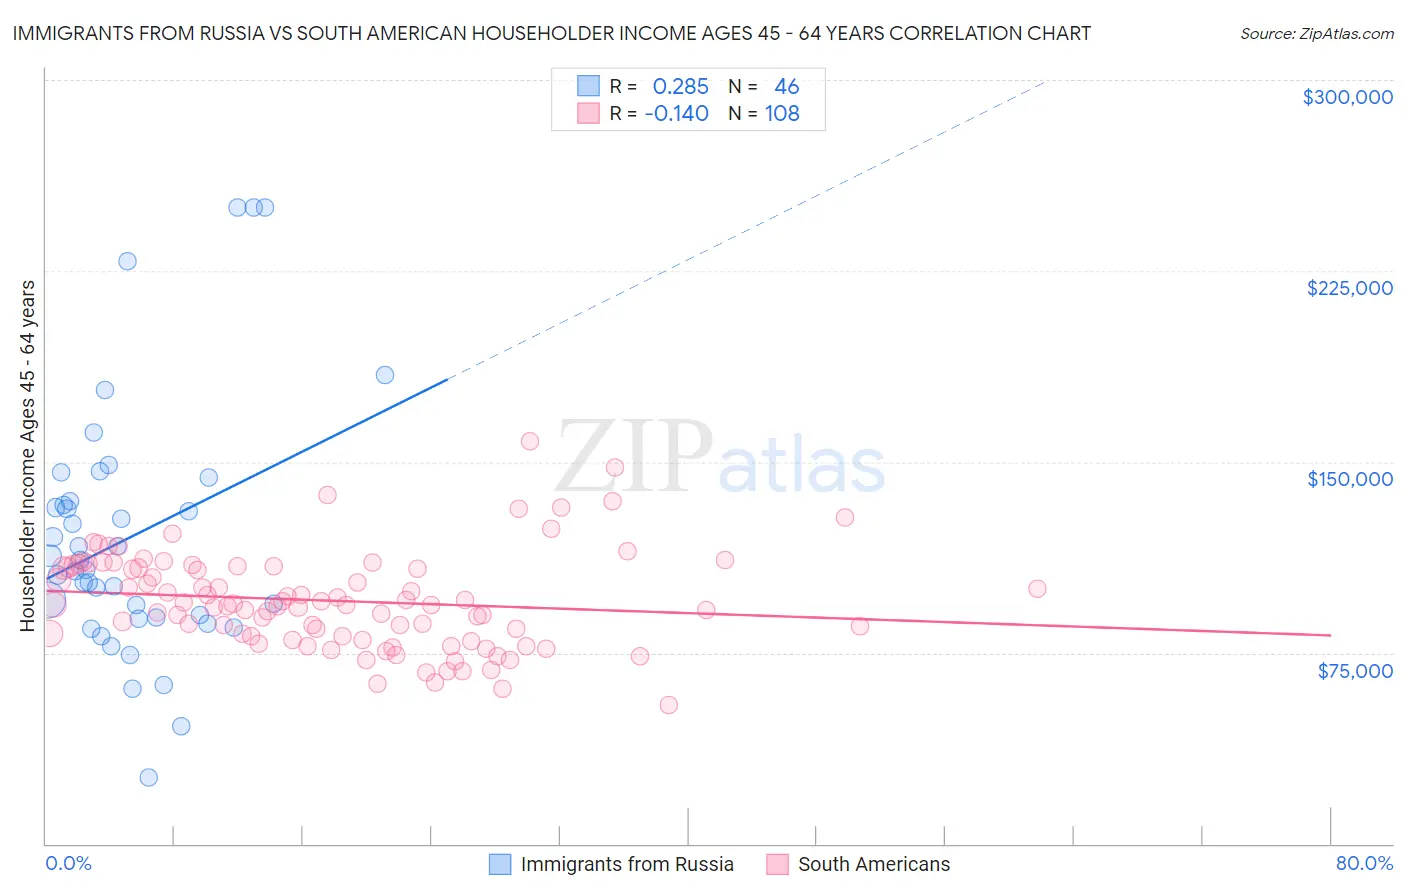 Immigrants from Russia vs South American Householder Income Ages 45 - 64 years